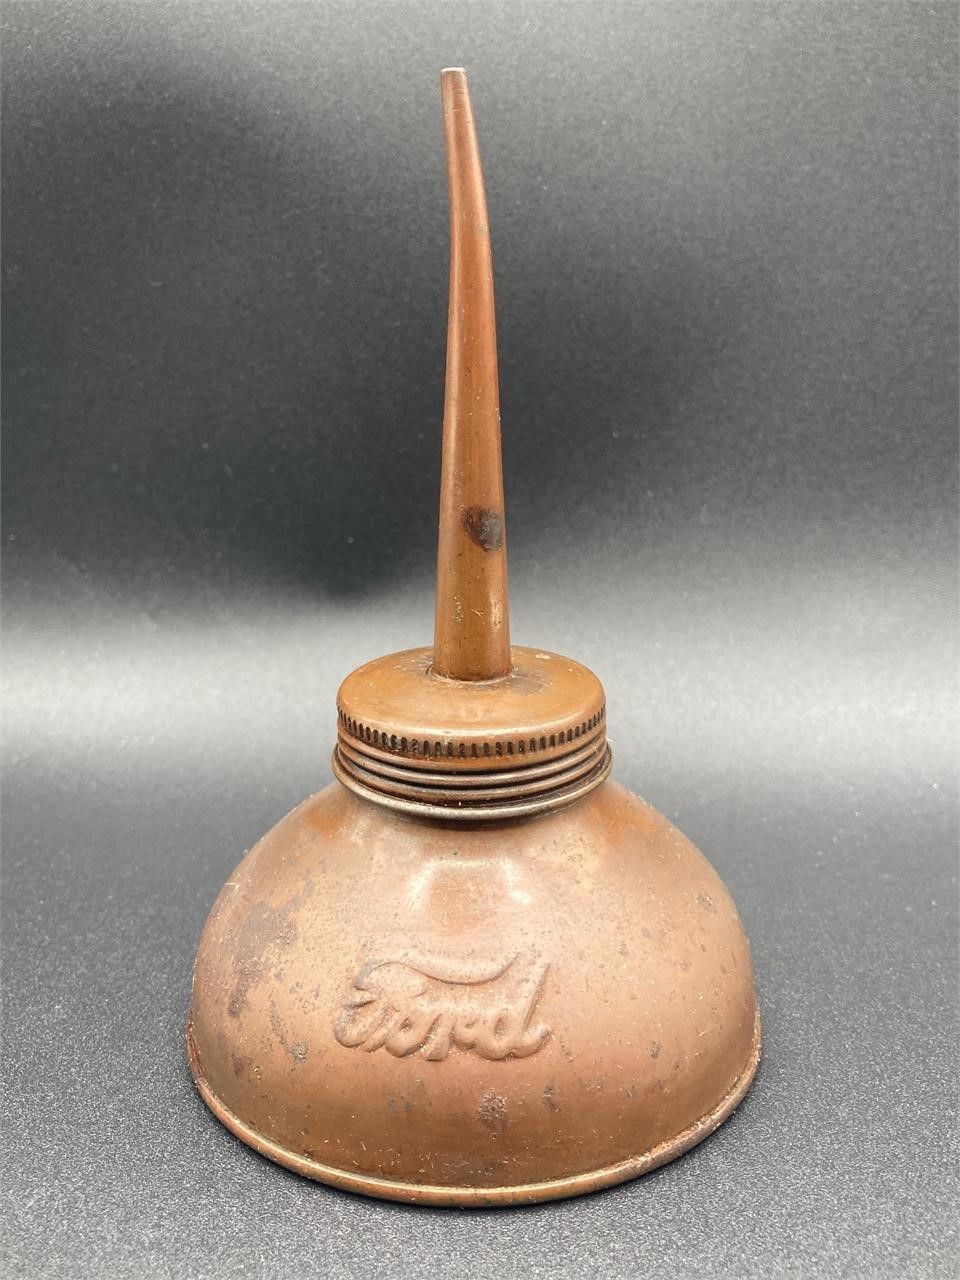 Antique 1920’s Ford Oil Can